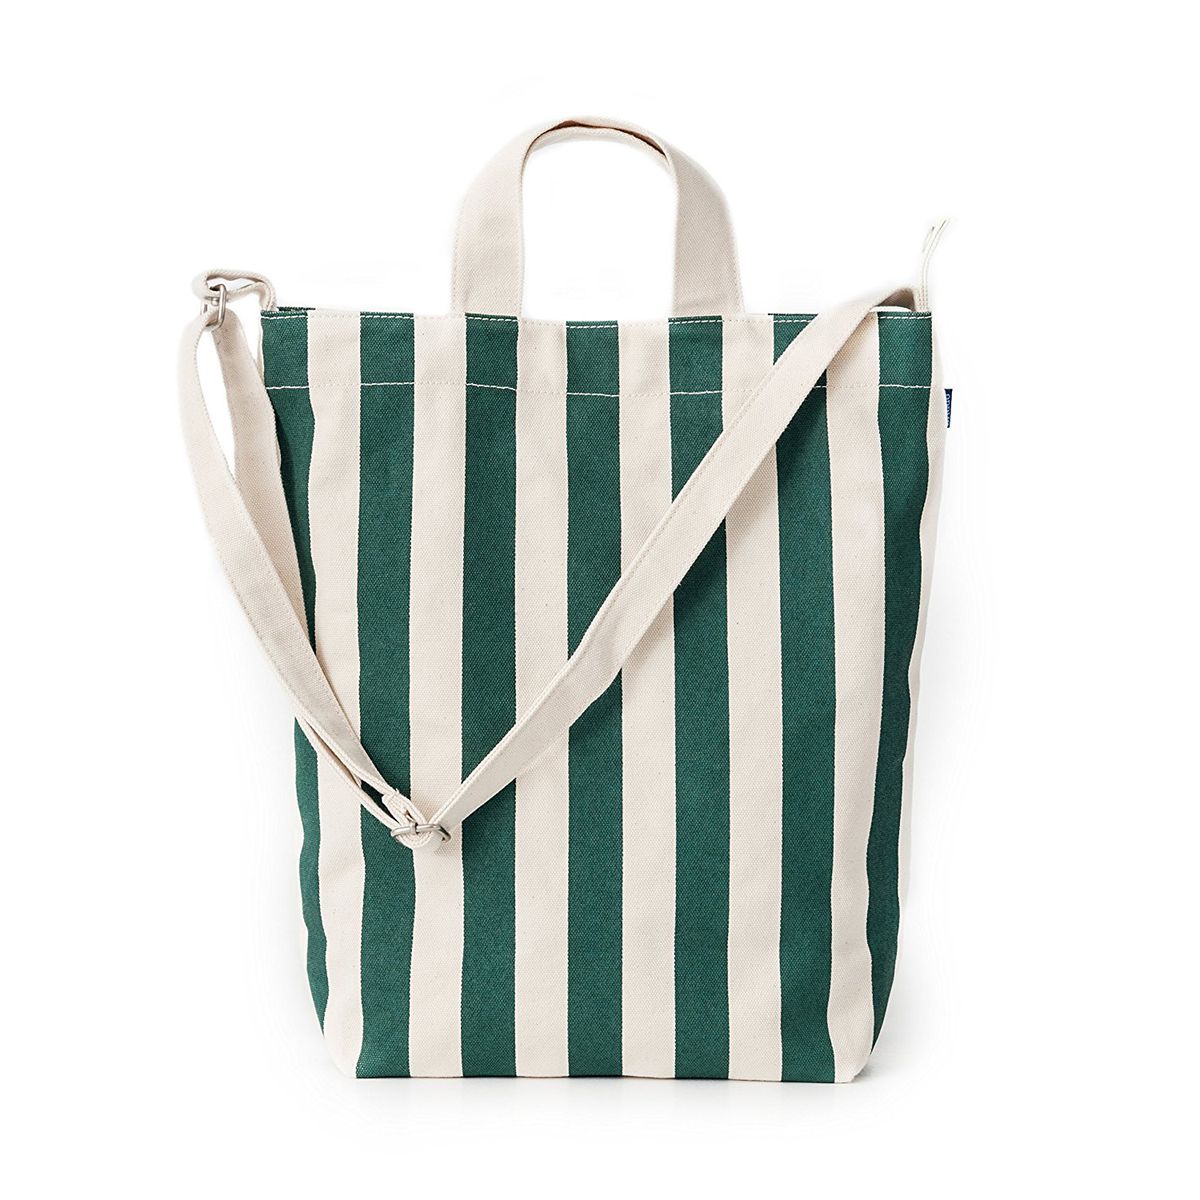 green and white striped bag.